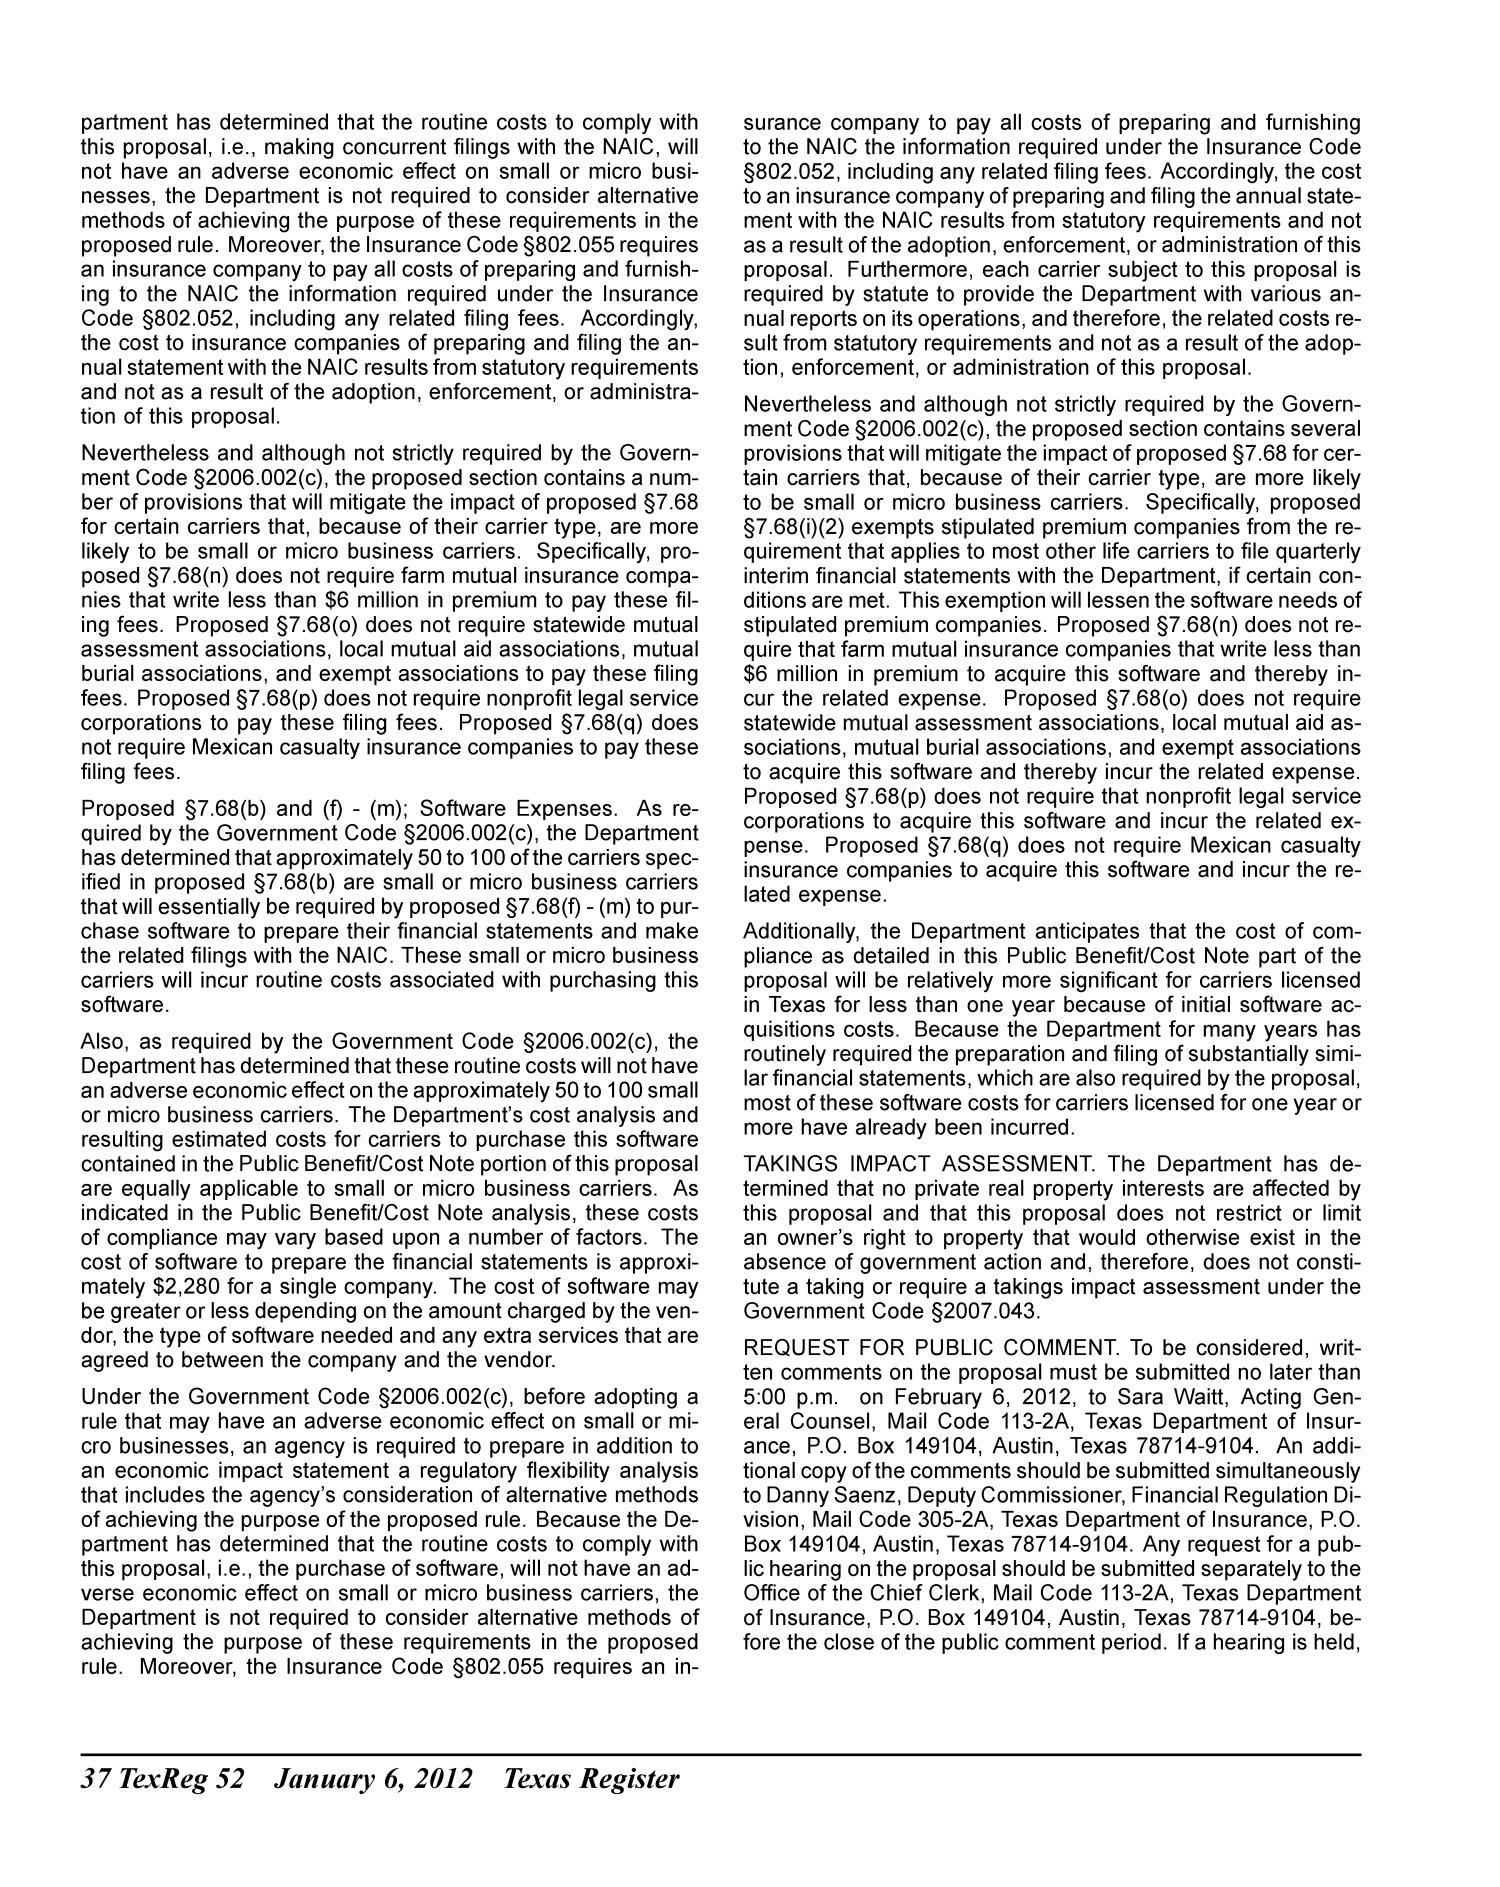 Texas Register, Volume 37, Number 1, Pages 1-84, January 6, 2012
                                                
                                                    52
                                                